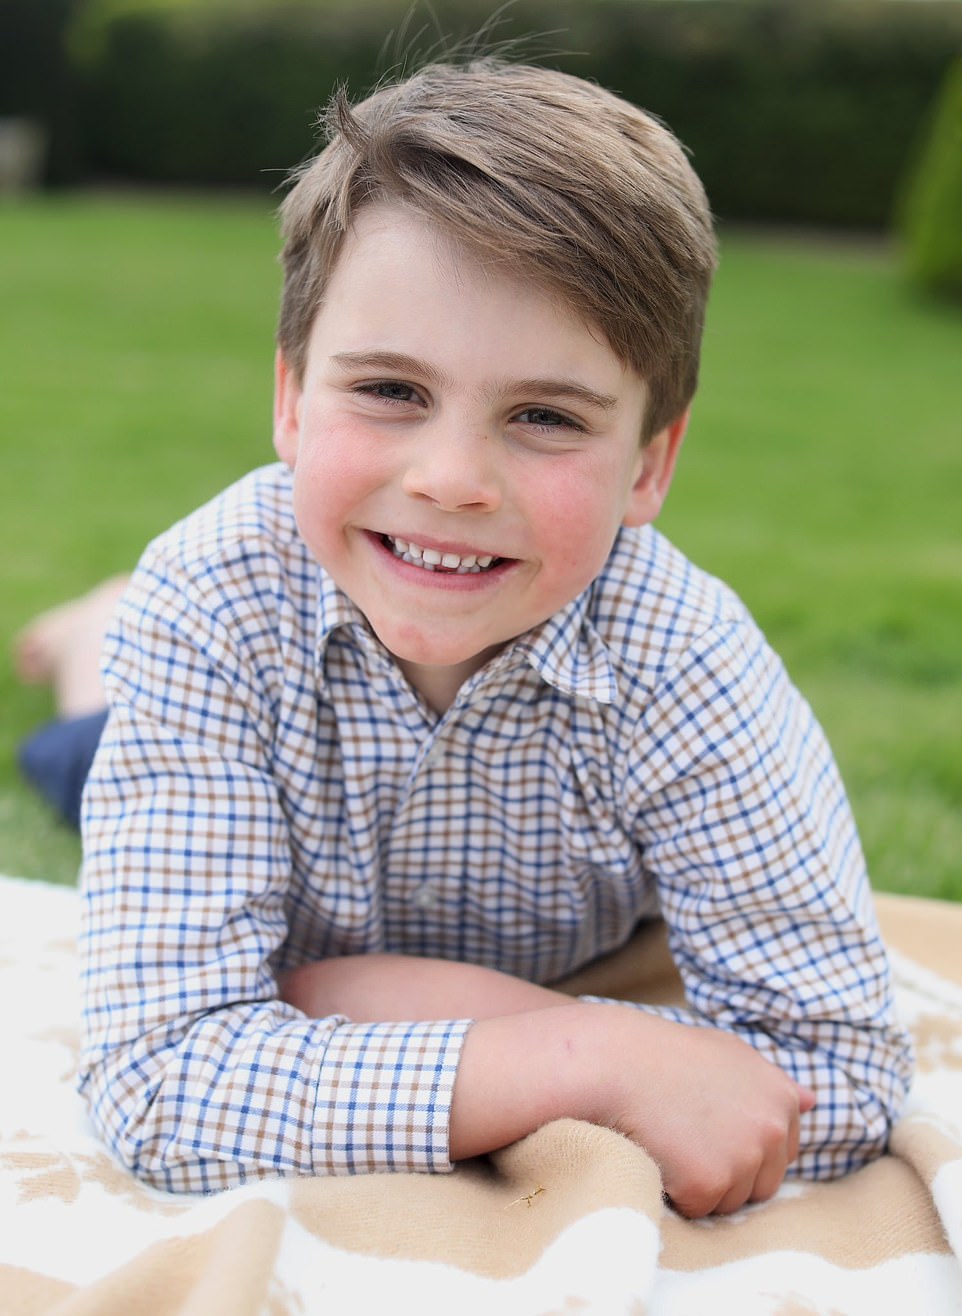 Prince Louis' birthday portrait (pictured) was taken by his mother and posted when he turned six this week.